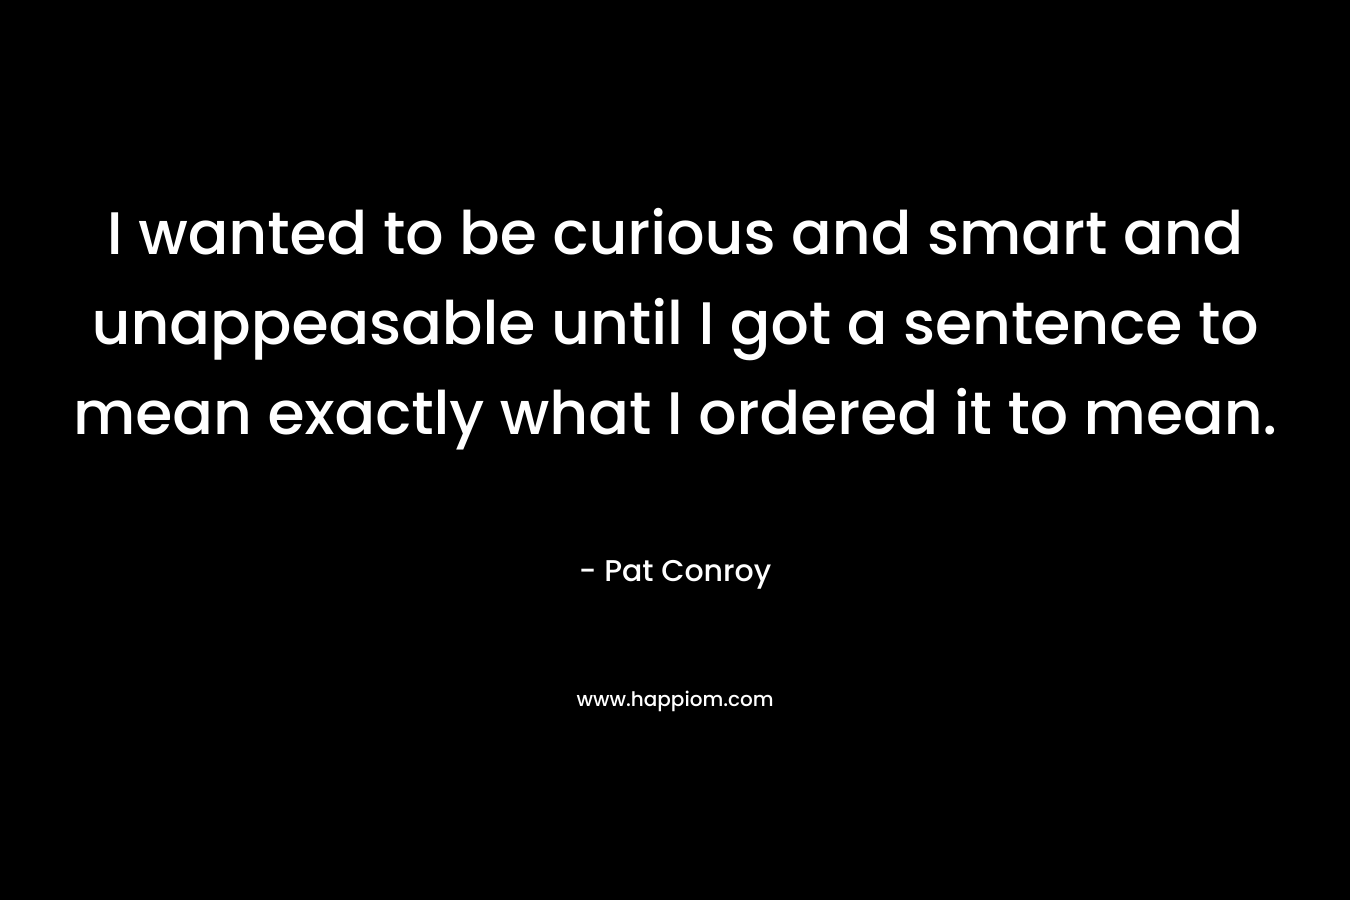 I wanted to be curious and smart and unappeasable until I got a sentence to mean exactly what I ordered it to mean. – Pat Conroy